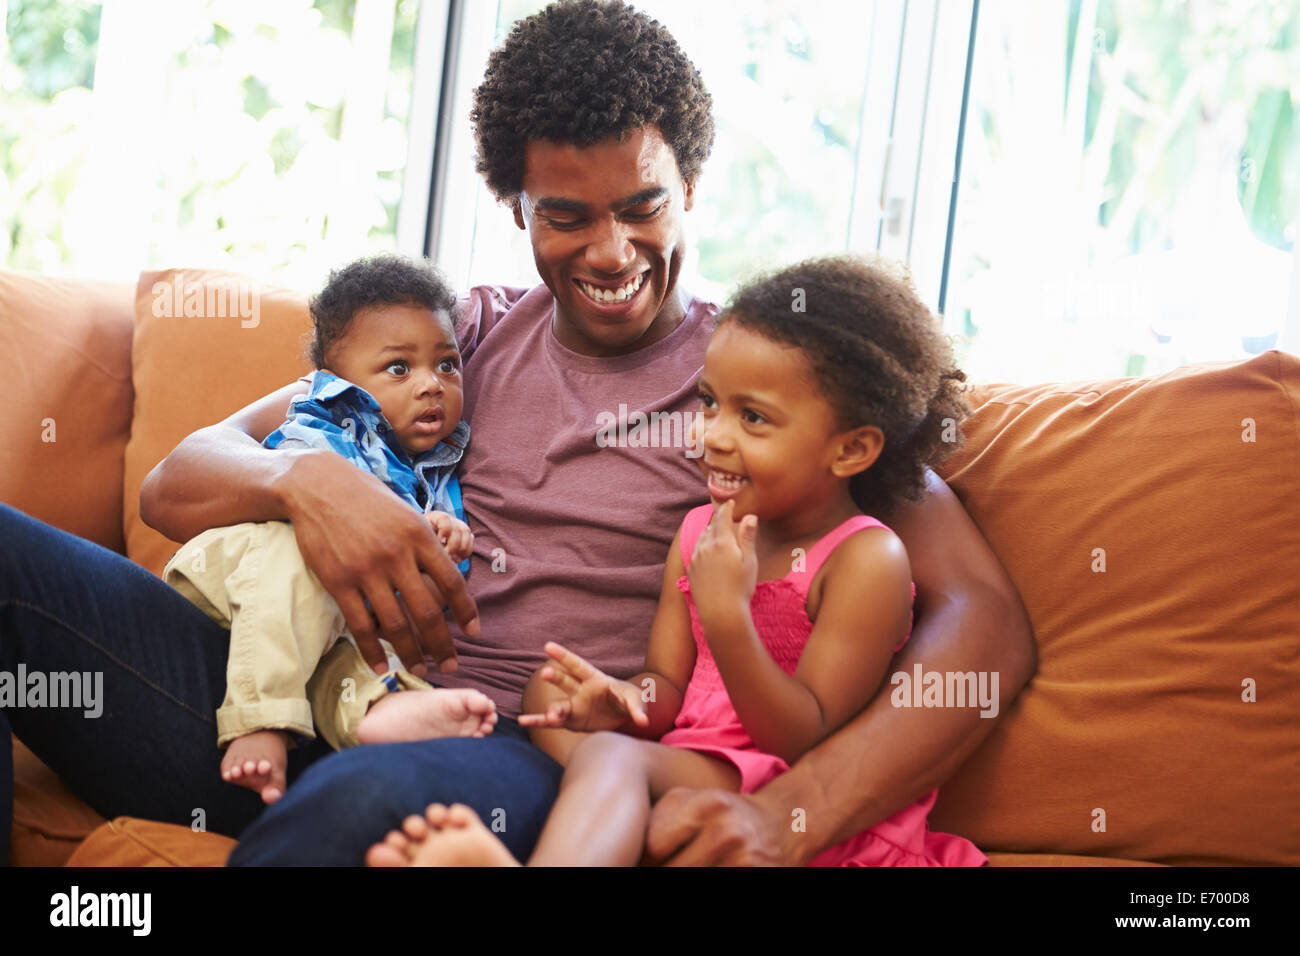 Father Relaxing On Sofa With Young Children Stock Photo